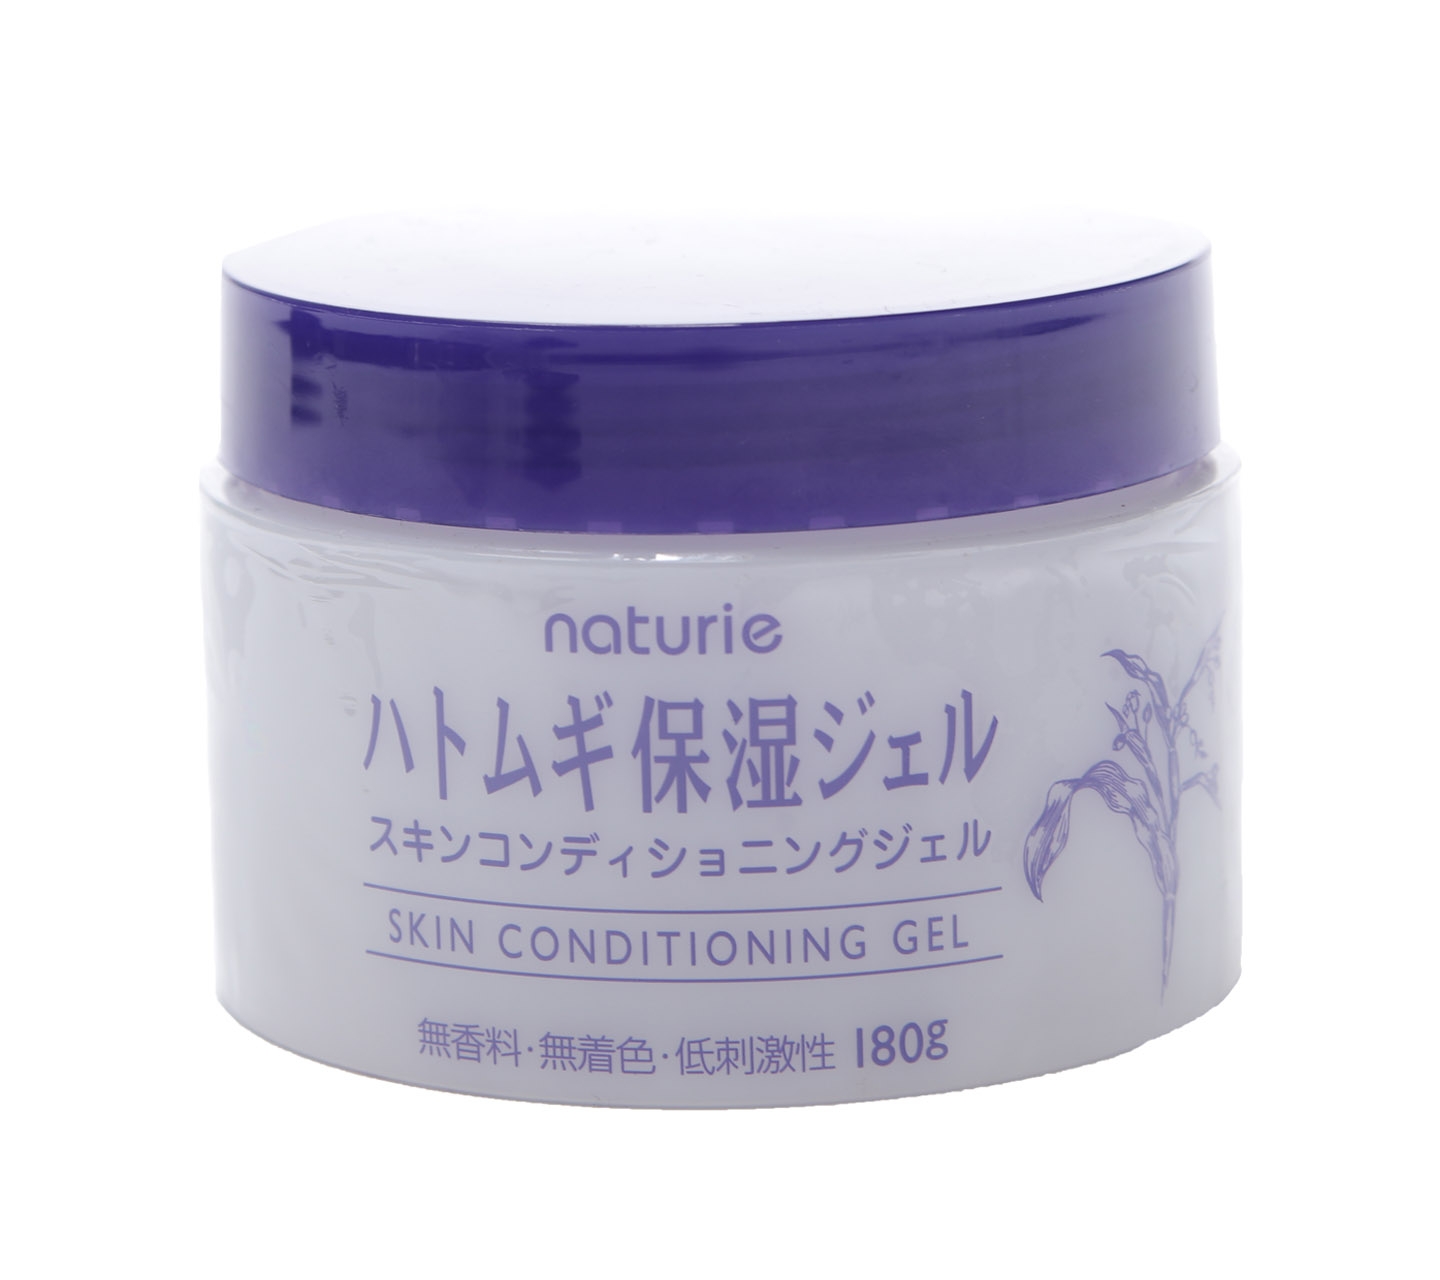 Naturie Skin Conditioning Gel Skin Care